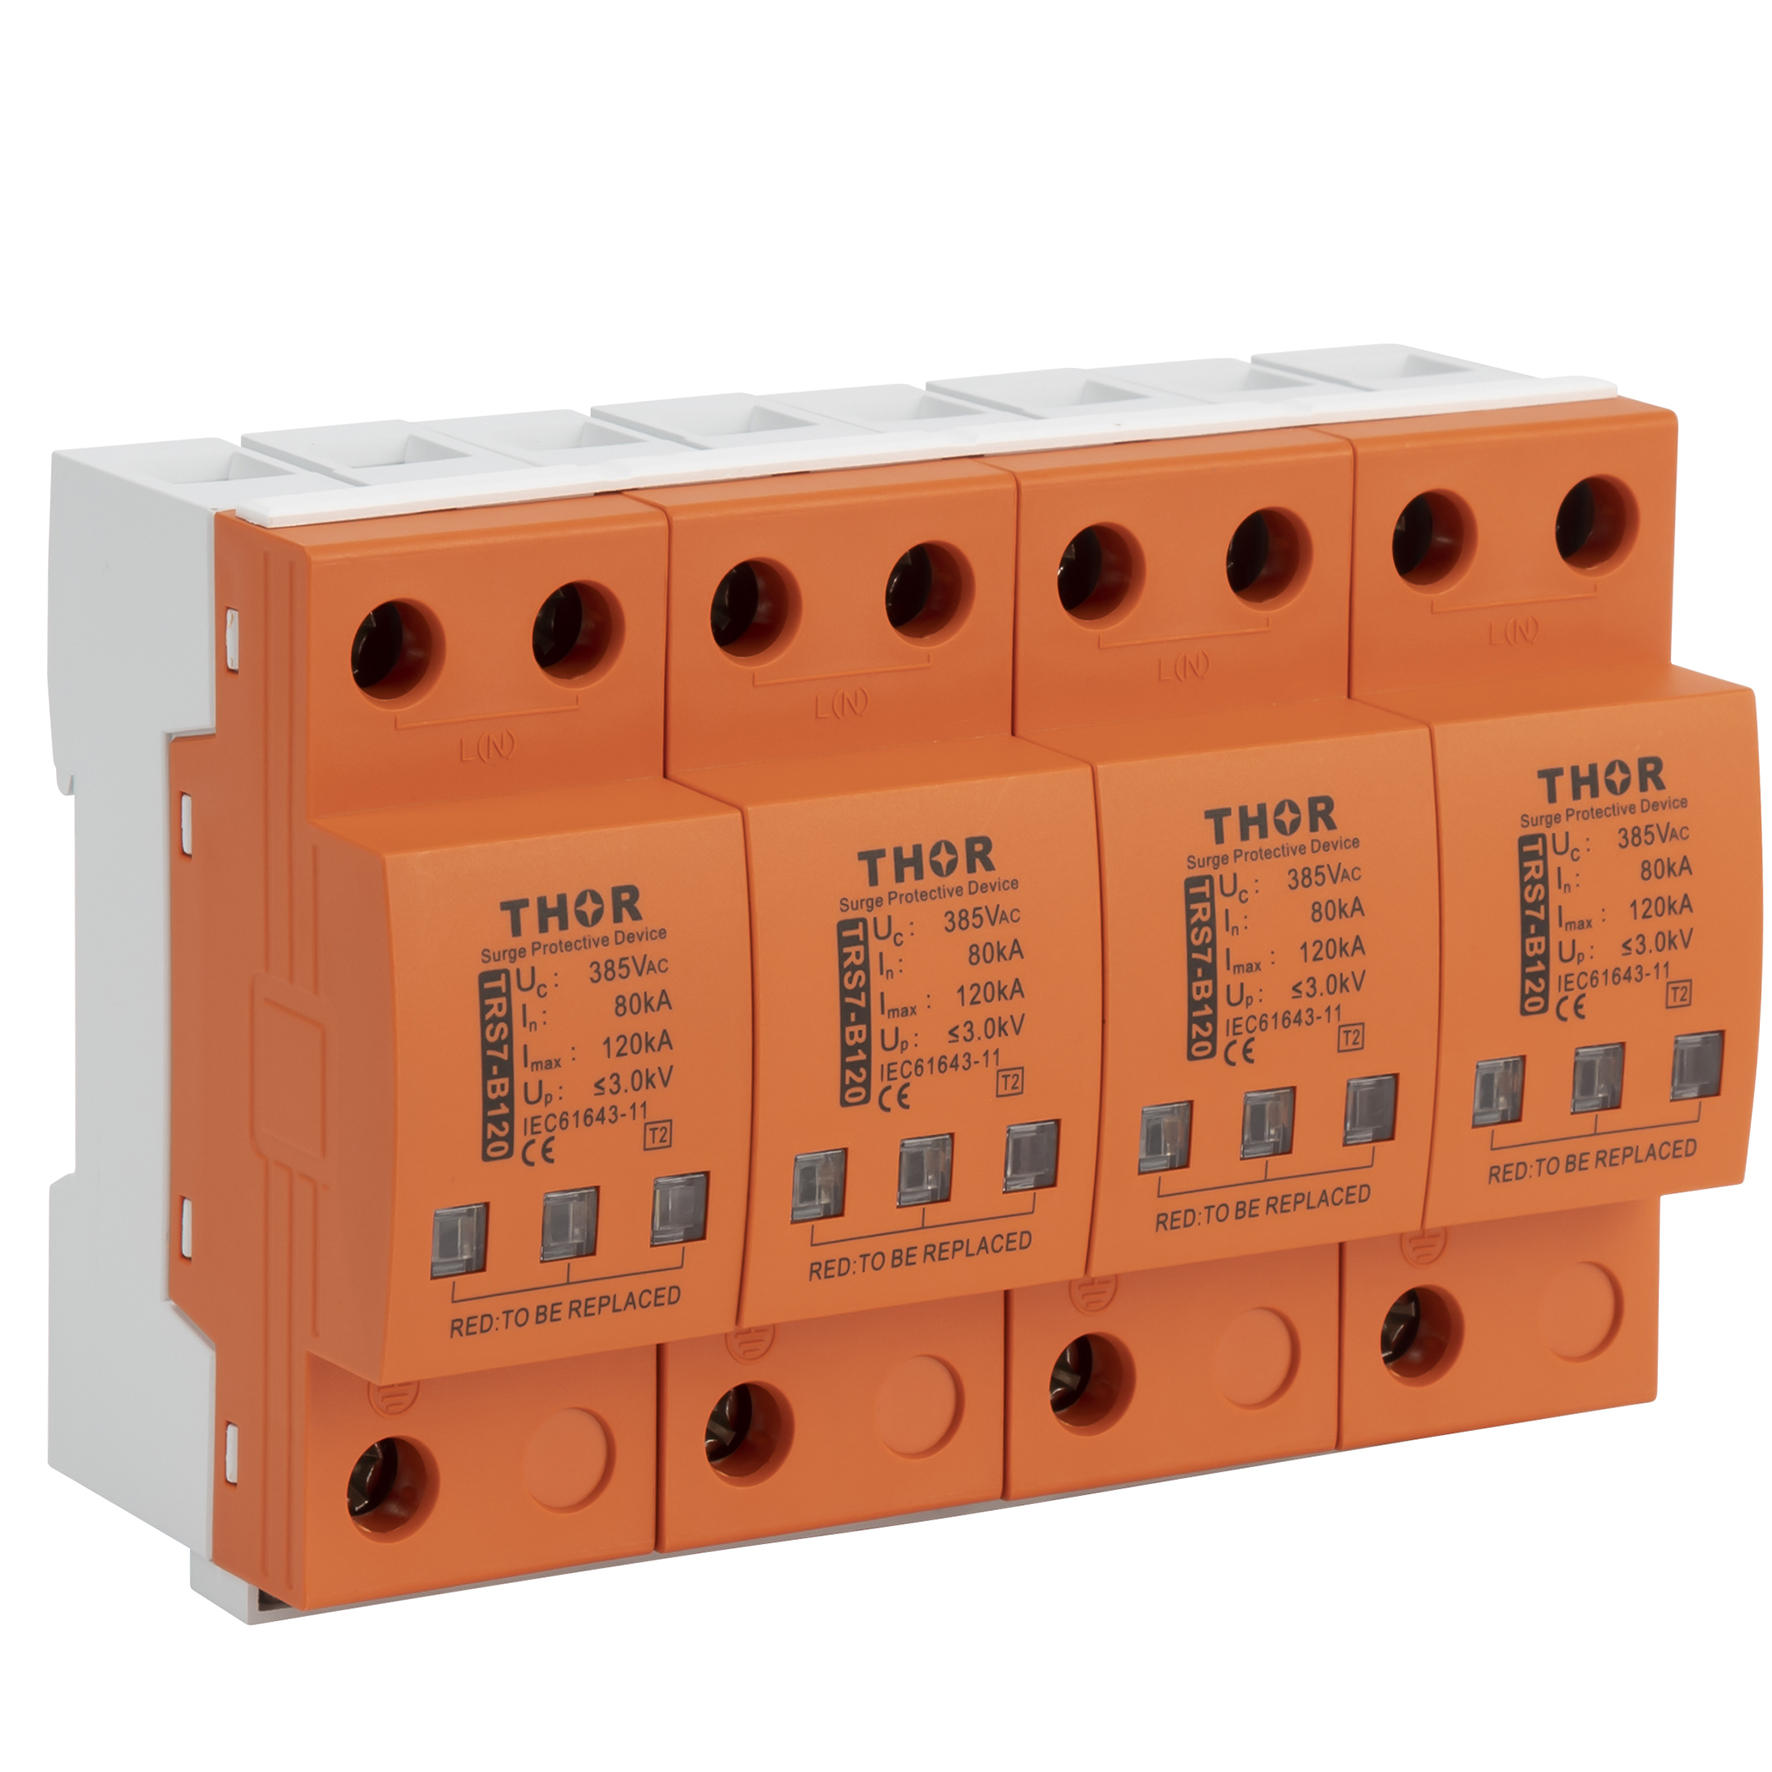 Type 2 AC surge protection device TRS7 series